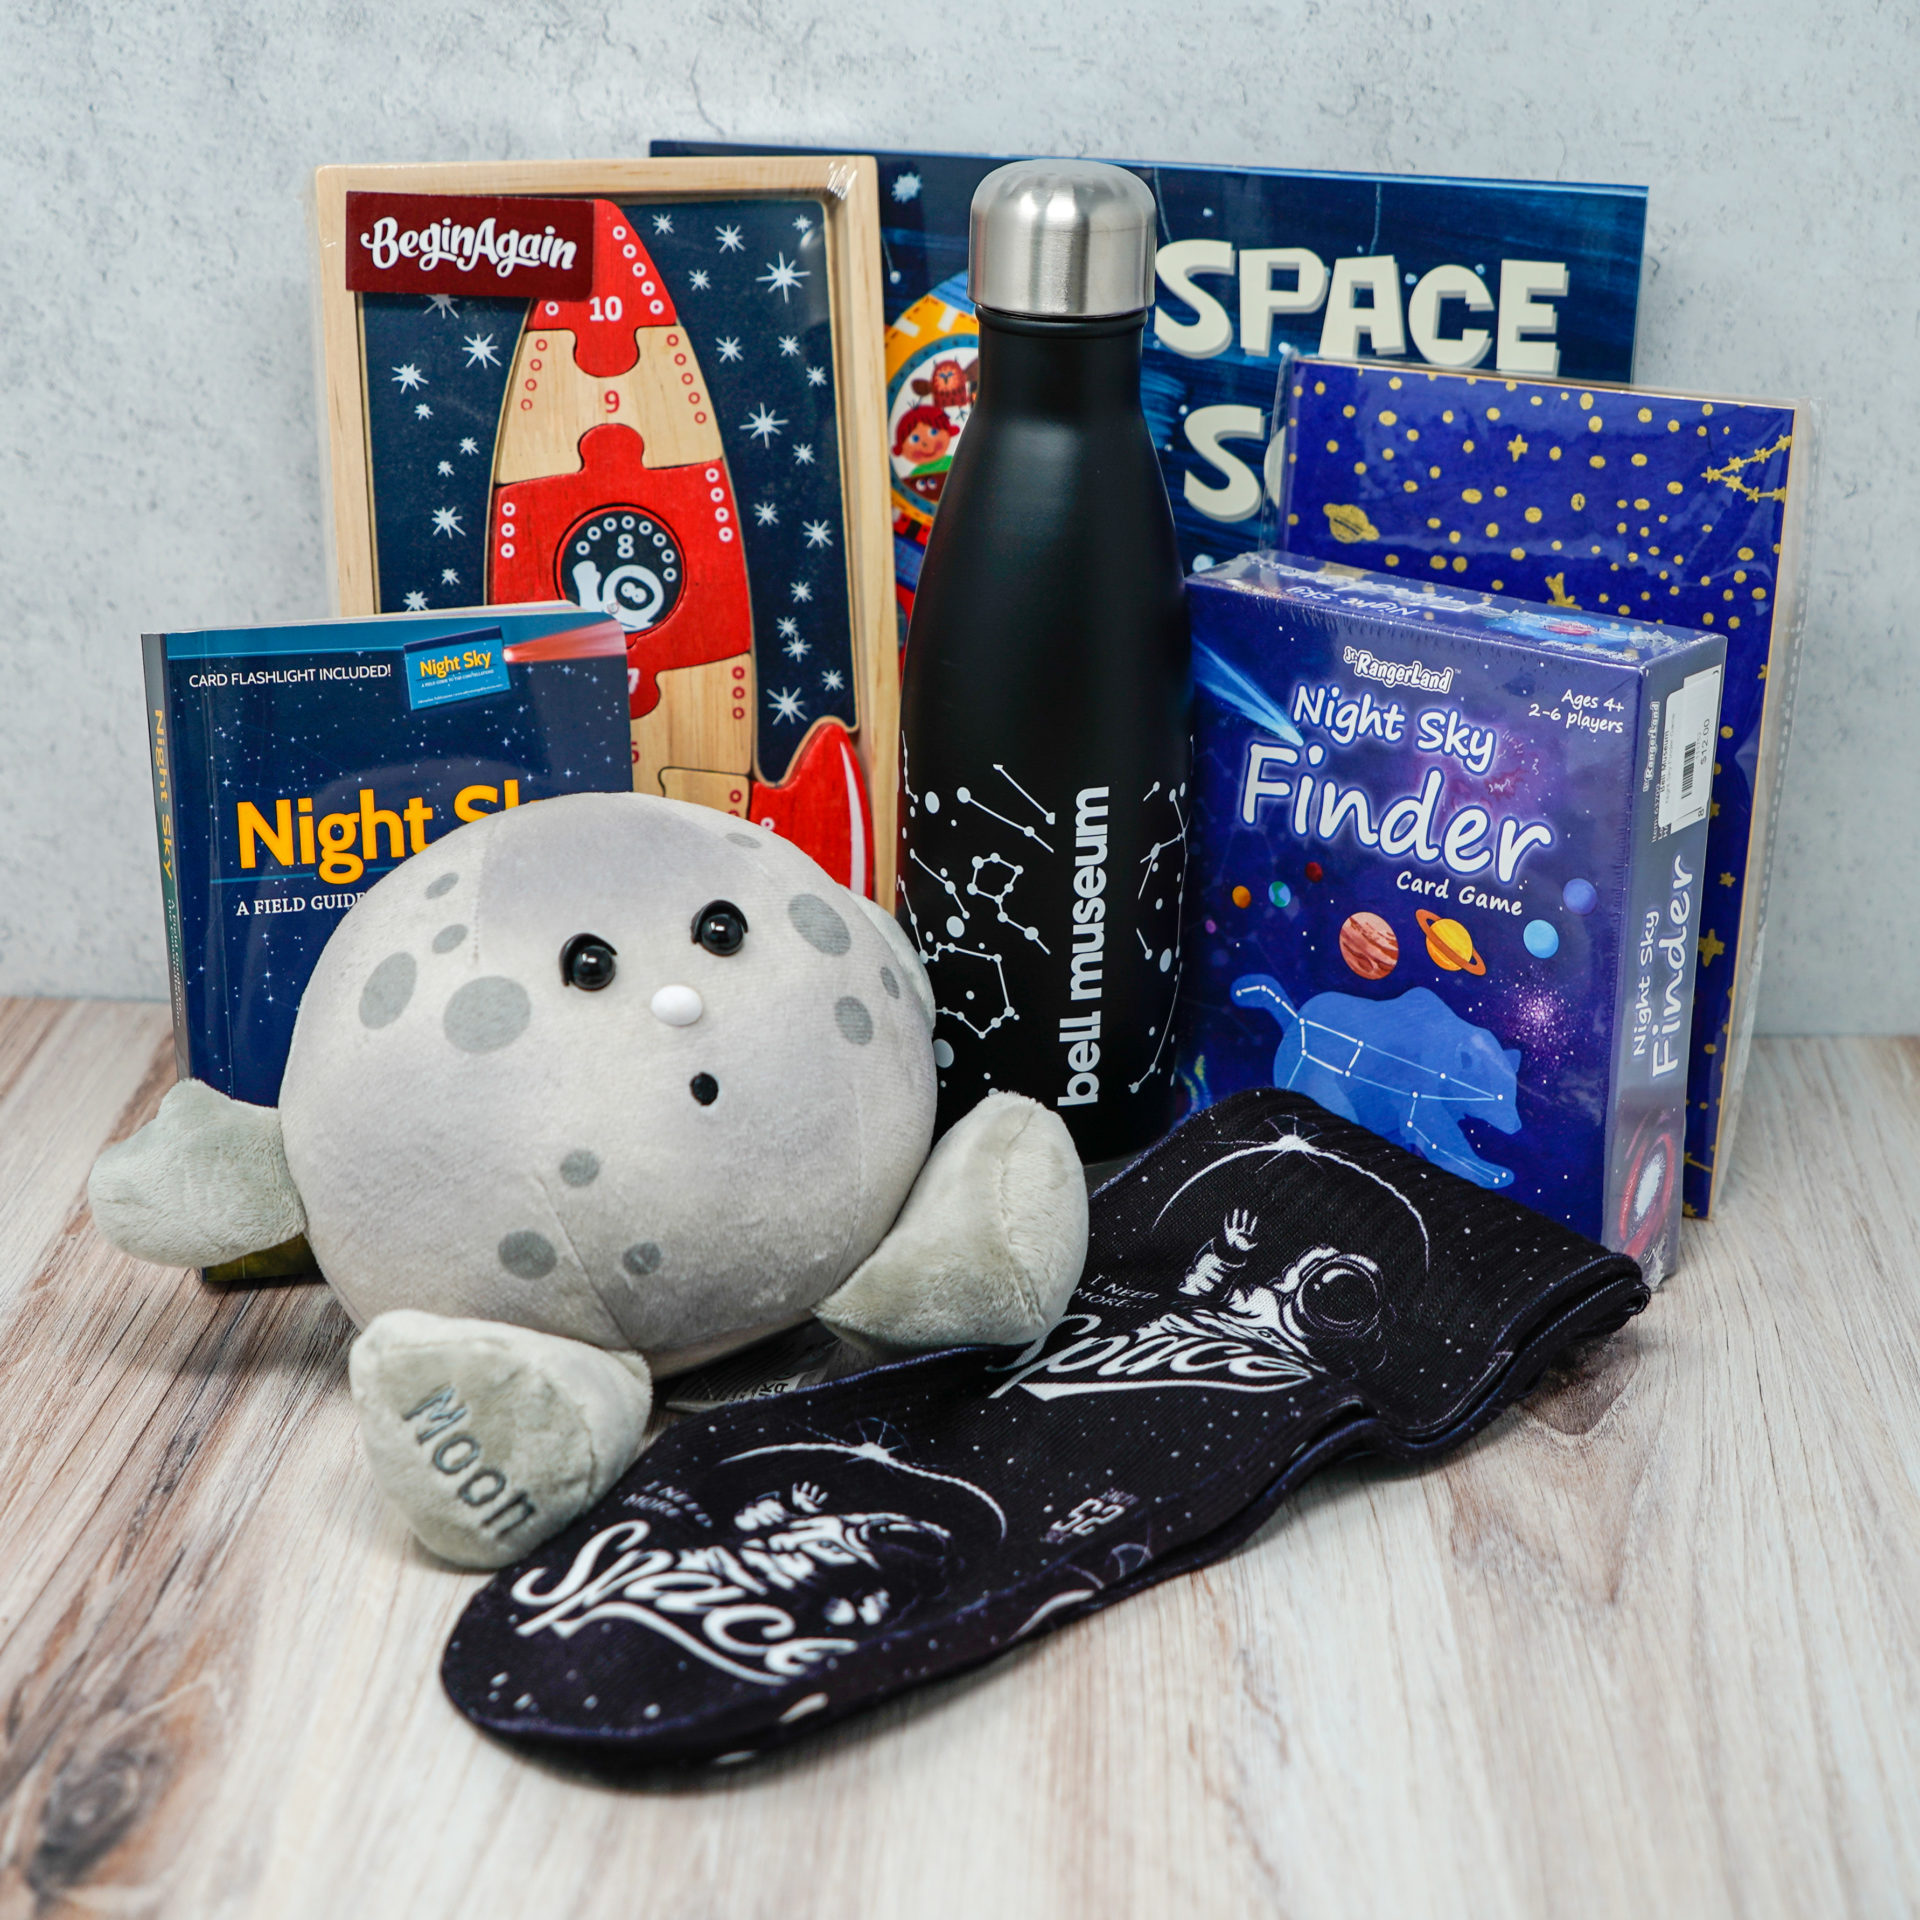 An assortment of space related gifts such as a plush moon and space socks